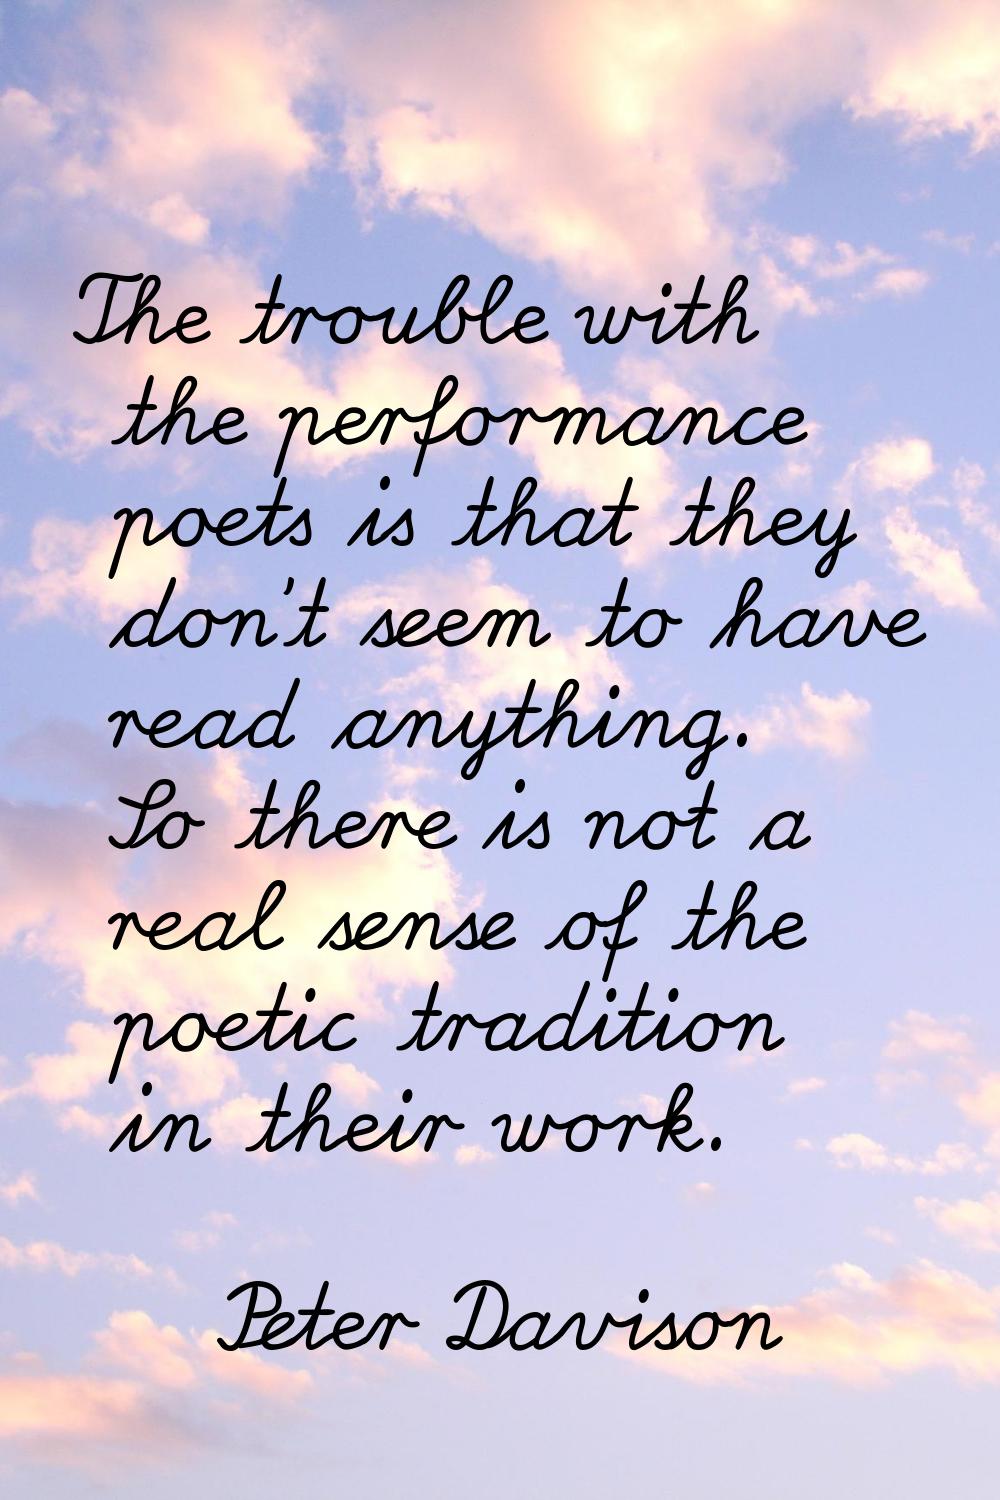 The trouble with the performance poets is that they don't seem to have read anything. So there is n